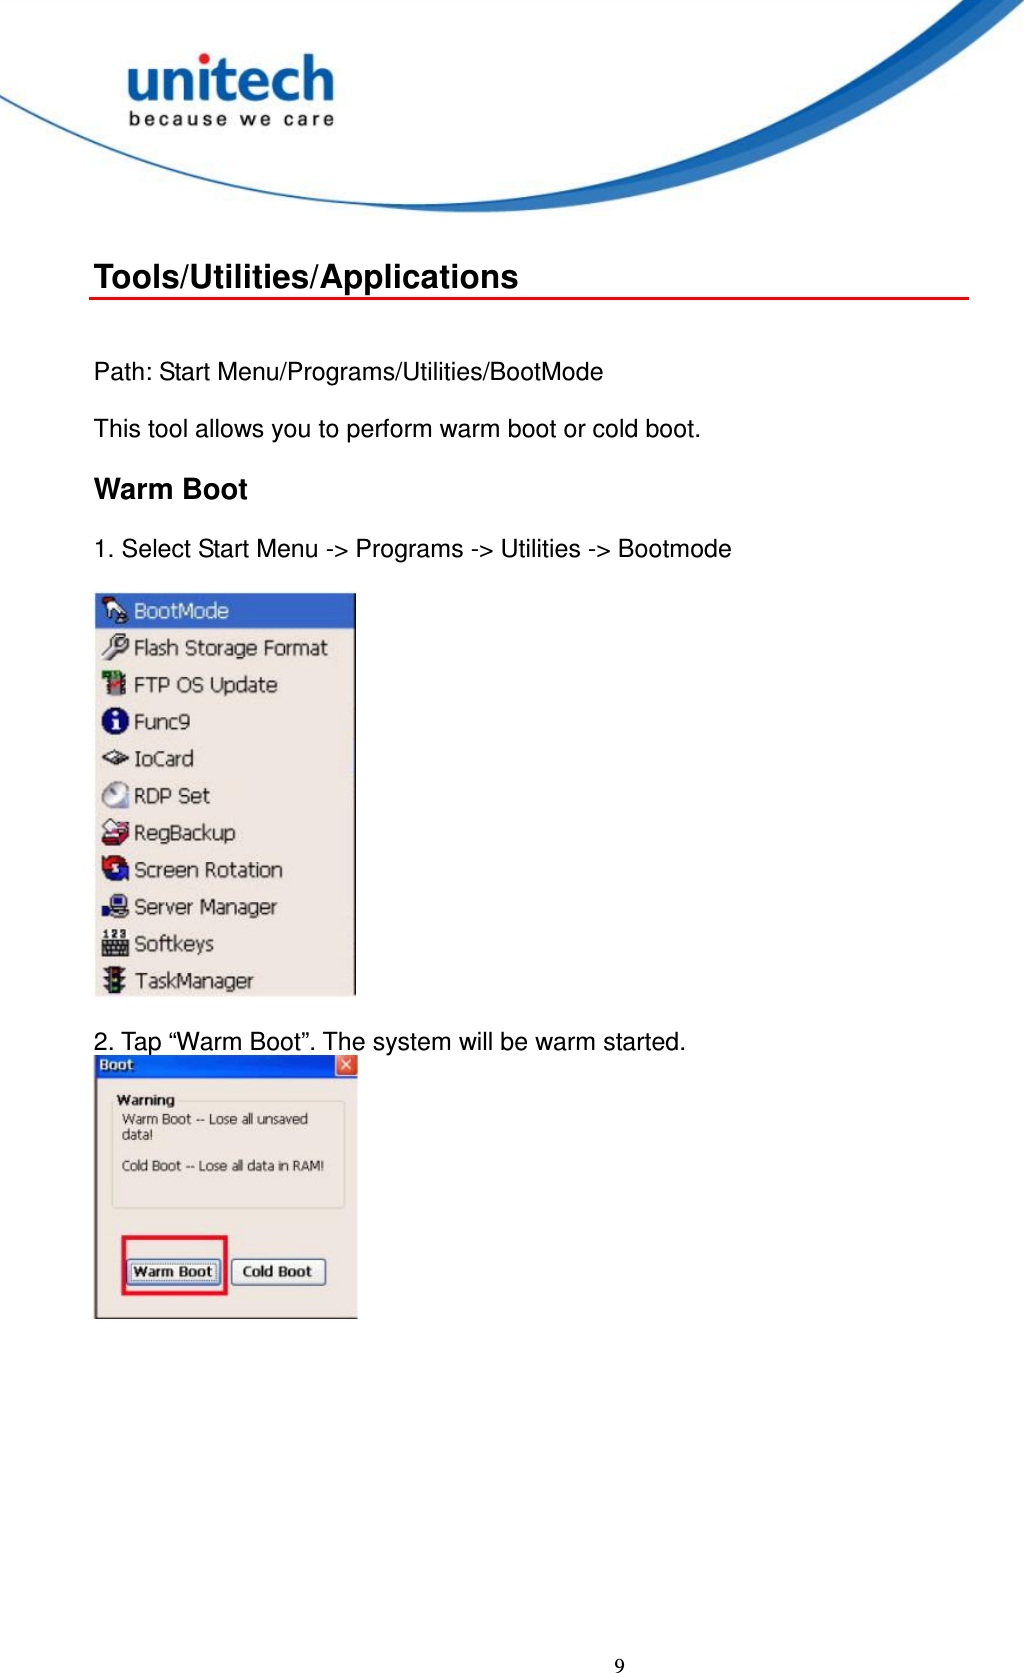  9  Tools/Utilities/Applications   Path: Start Menu/Programs/Utilities/BootMode      This tool allows you to perform warm boot or cold boot.      Warm Boot      1. Select Start Menu -&gt; Programs -&gt; Utilities -&gt; Bootmode    2. Tap “Warm Boot”. The system will be warm started.                 